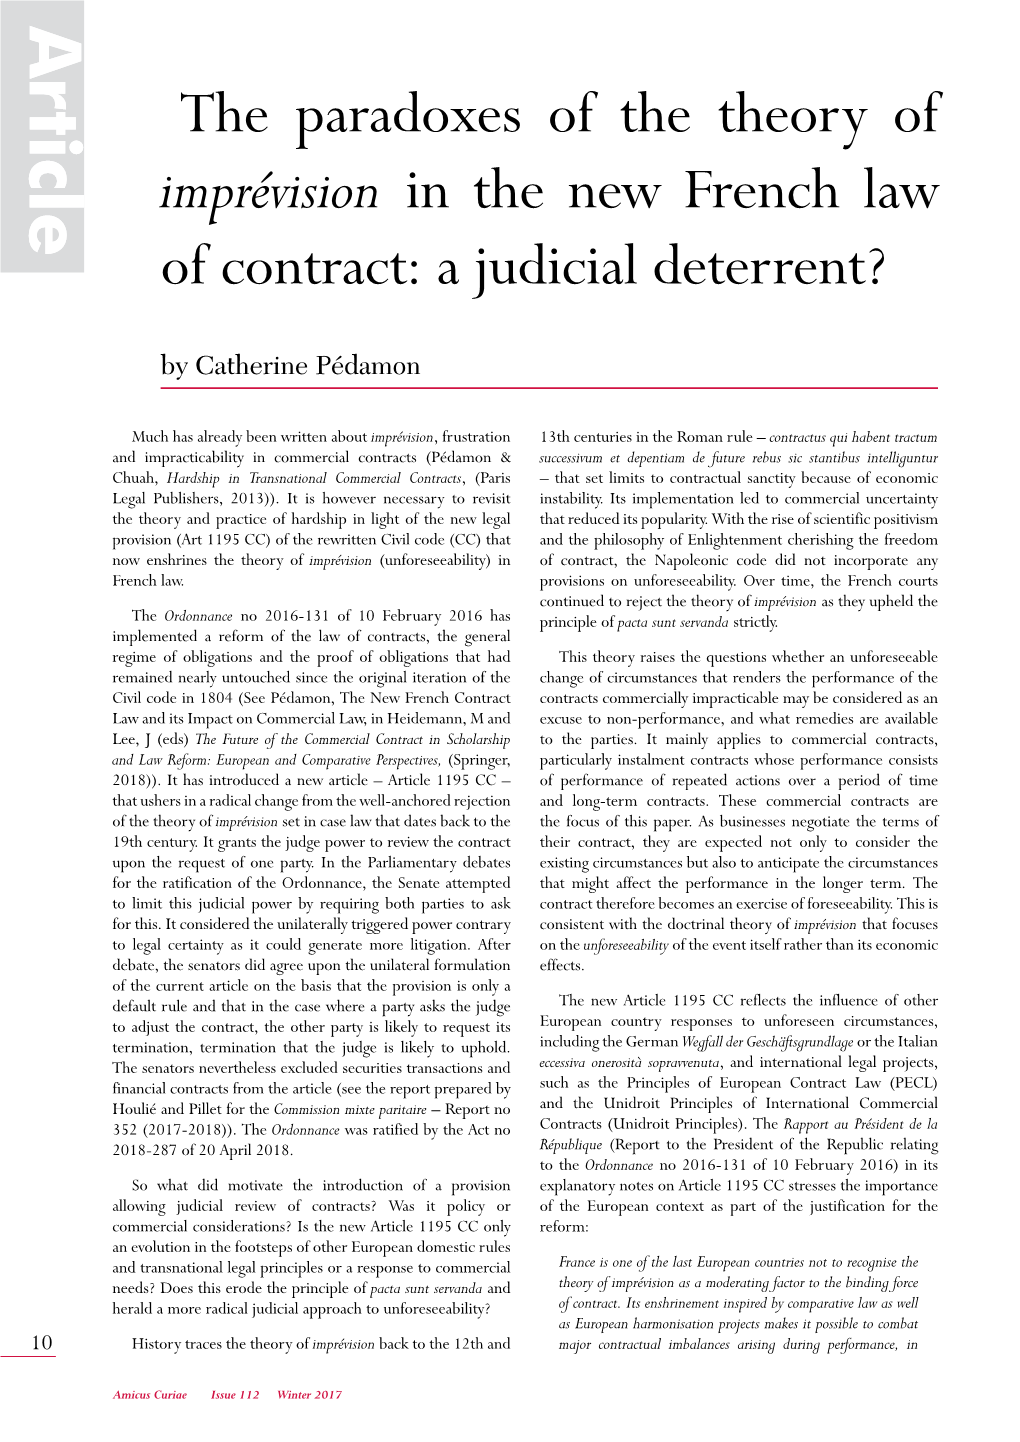 The Paradoxes of the Theory of Imprévision in the New French Law of Contract: a Judicial Deterrent?